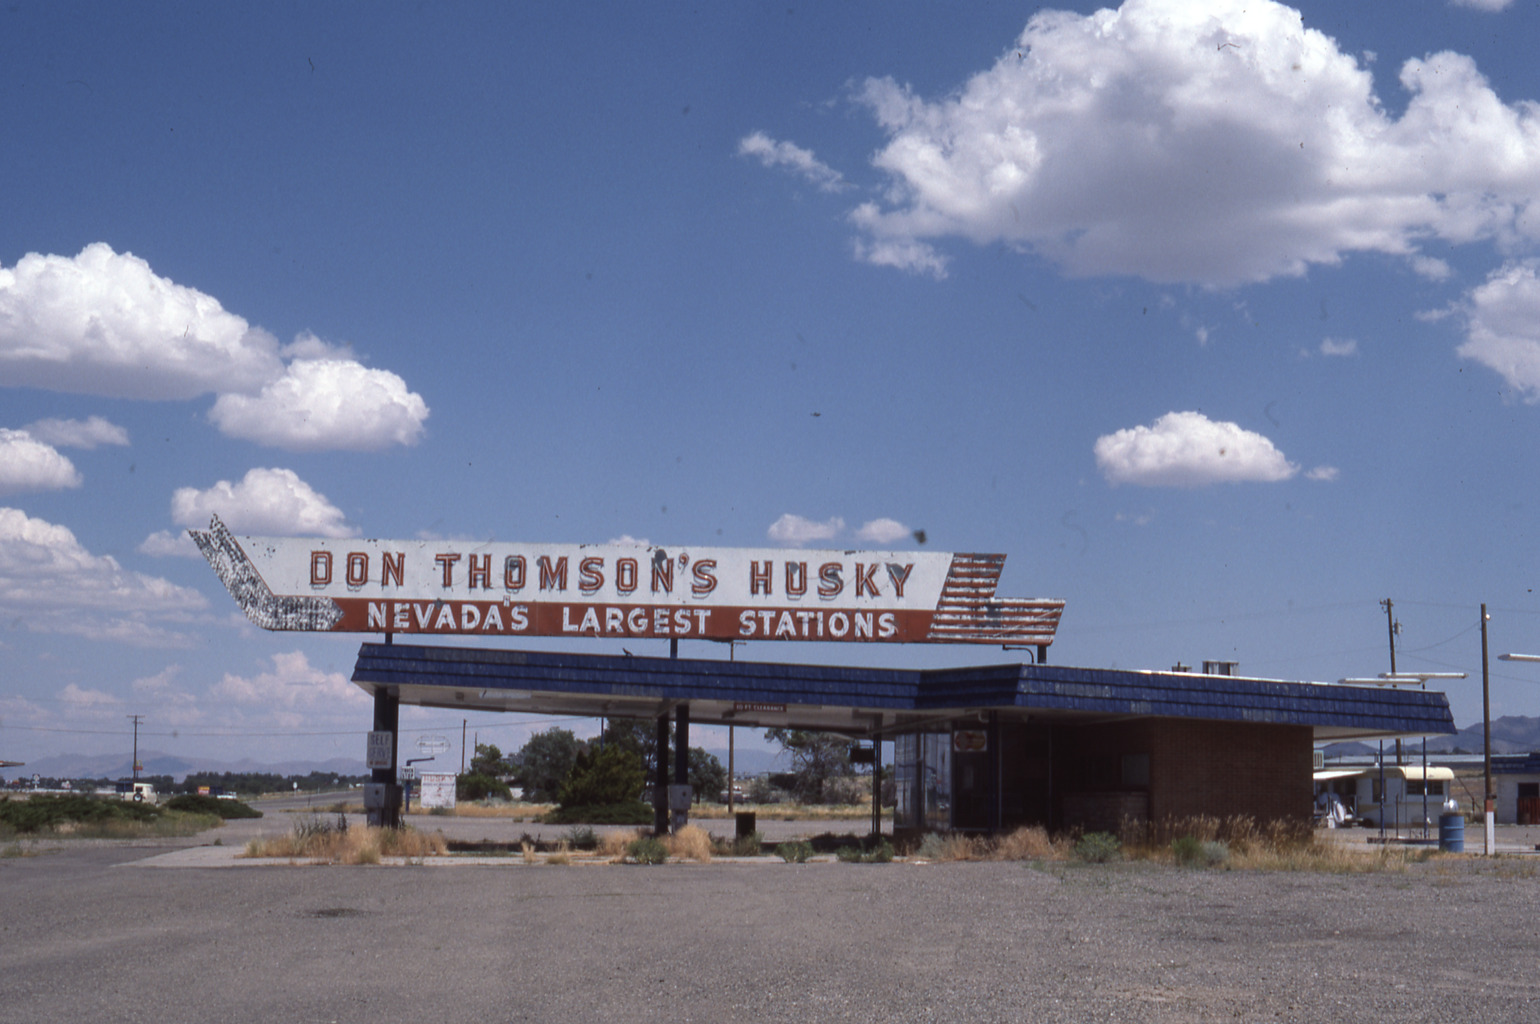 Husky Gas Station roof mounted sign, Winnemucca, Nevada: photographic print